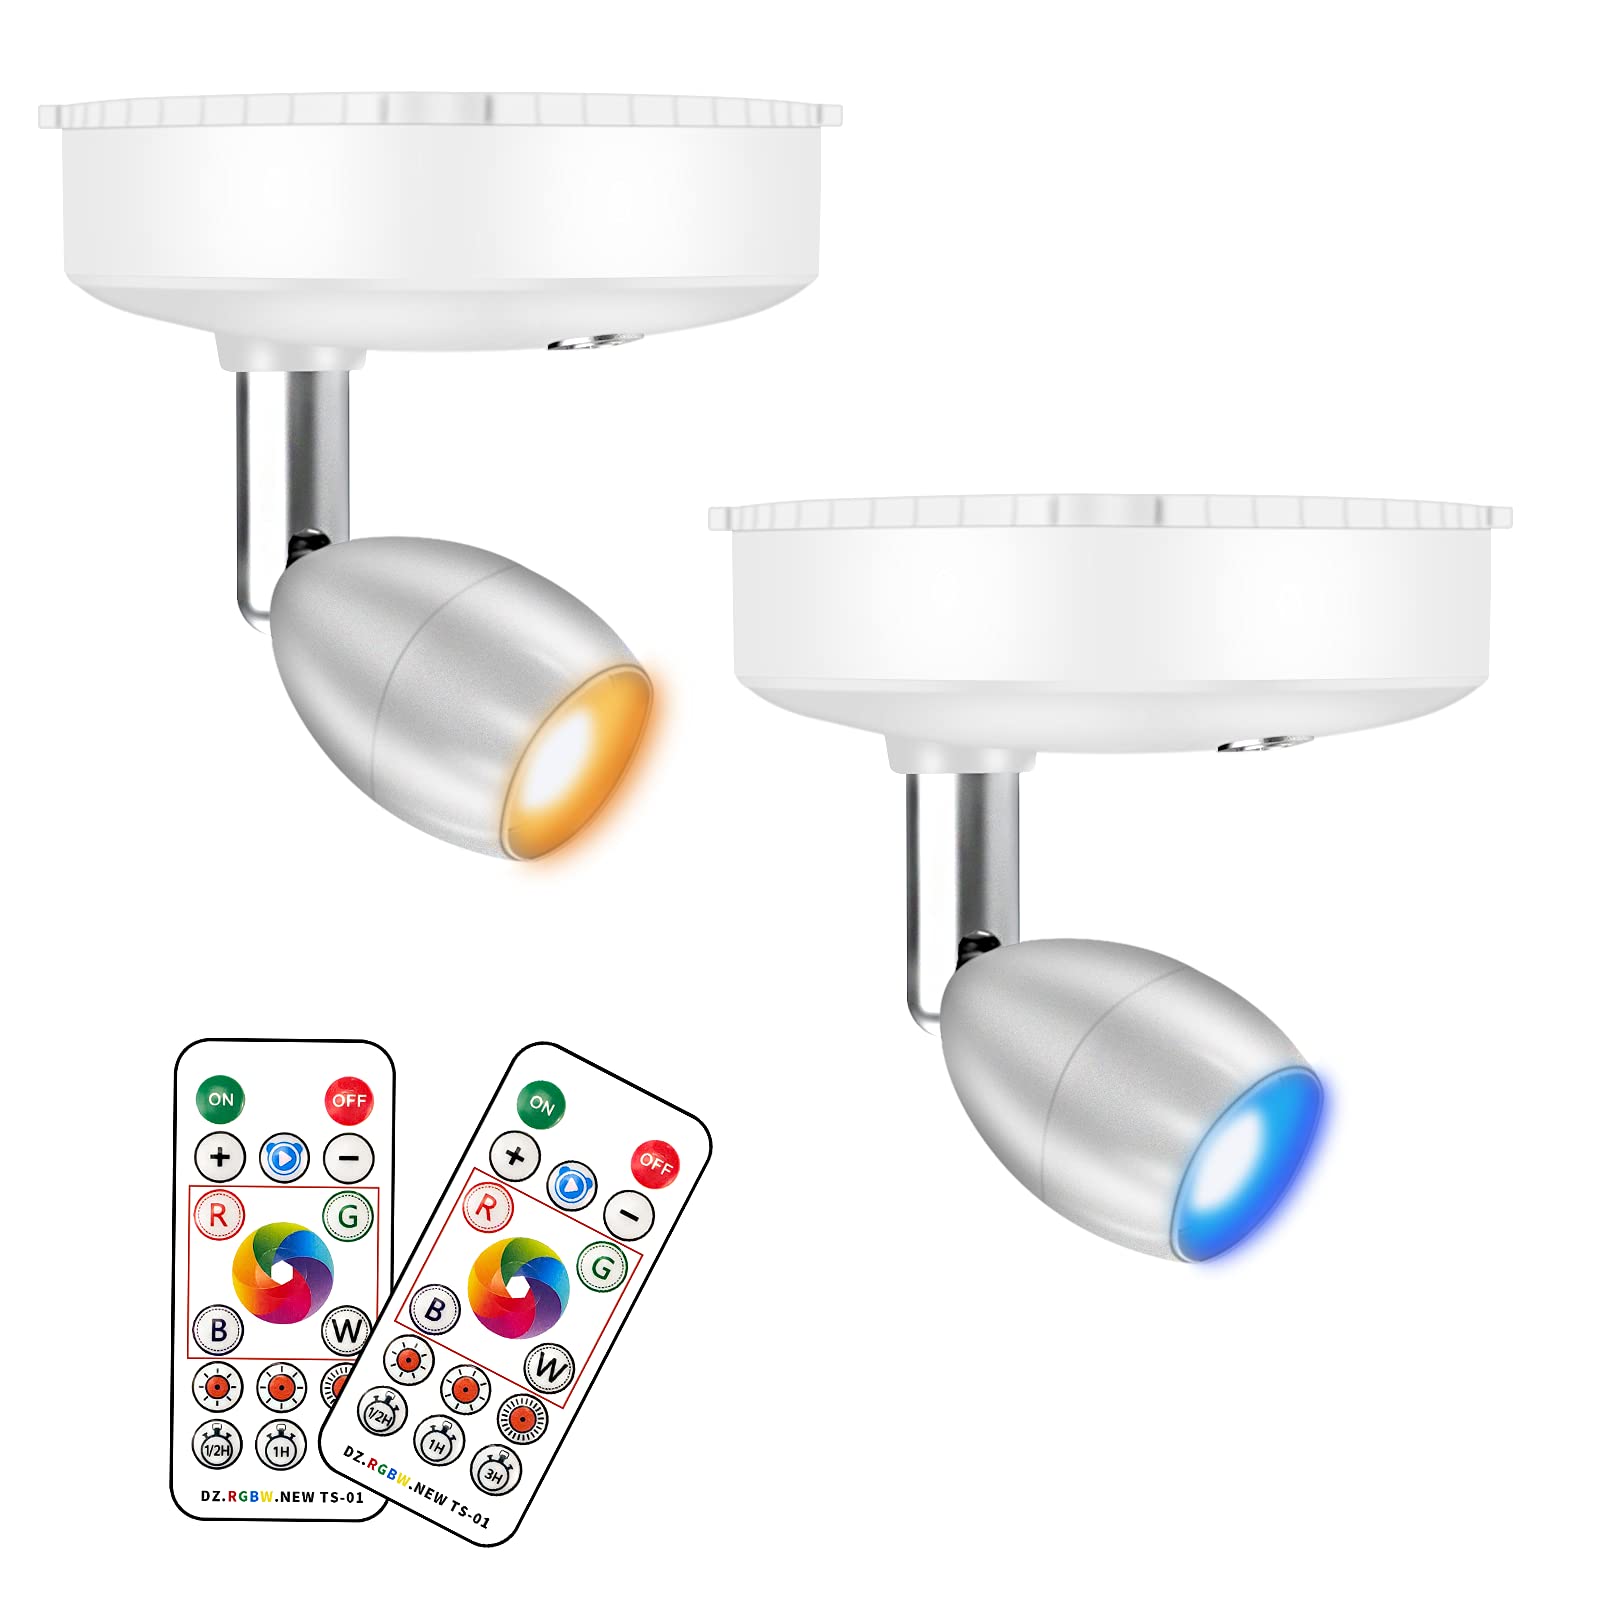 RGB Wireless Spotlight, LED Puck Light, Battery Operated Accent Lights with Remote, Dimmable Puck Light with Rotatable Light Head for Painting Picture Artwork Closet 2pack (RGBW)